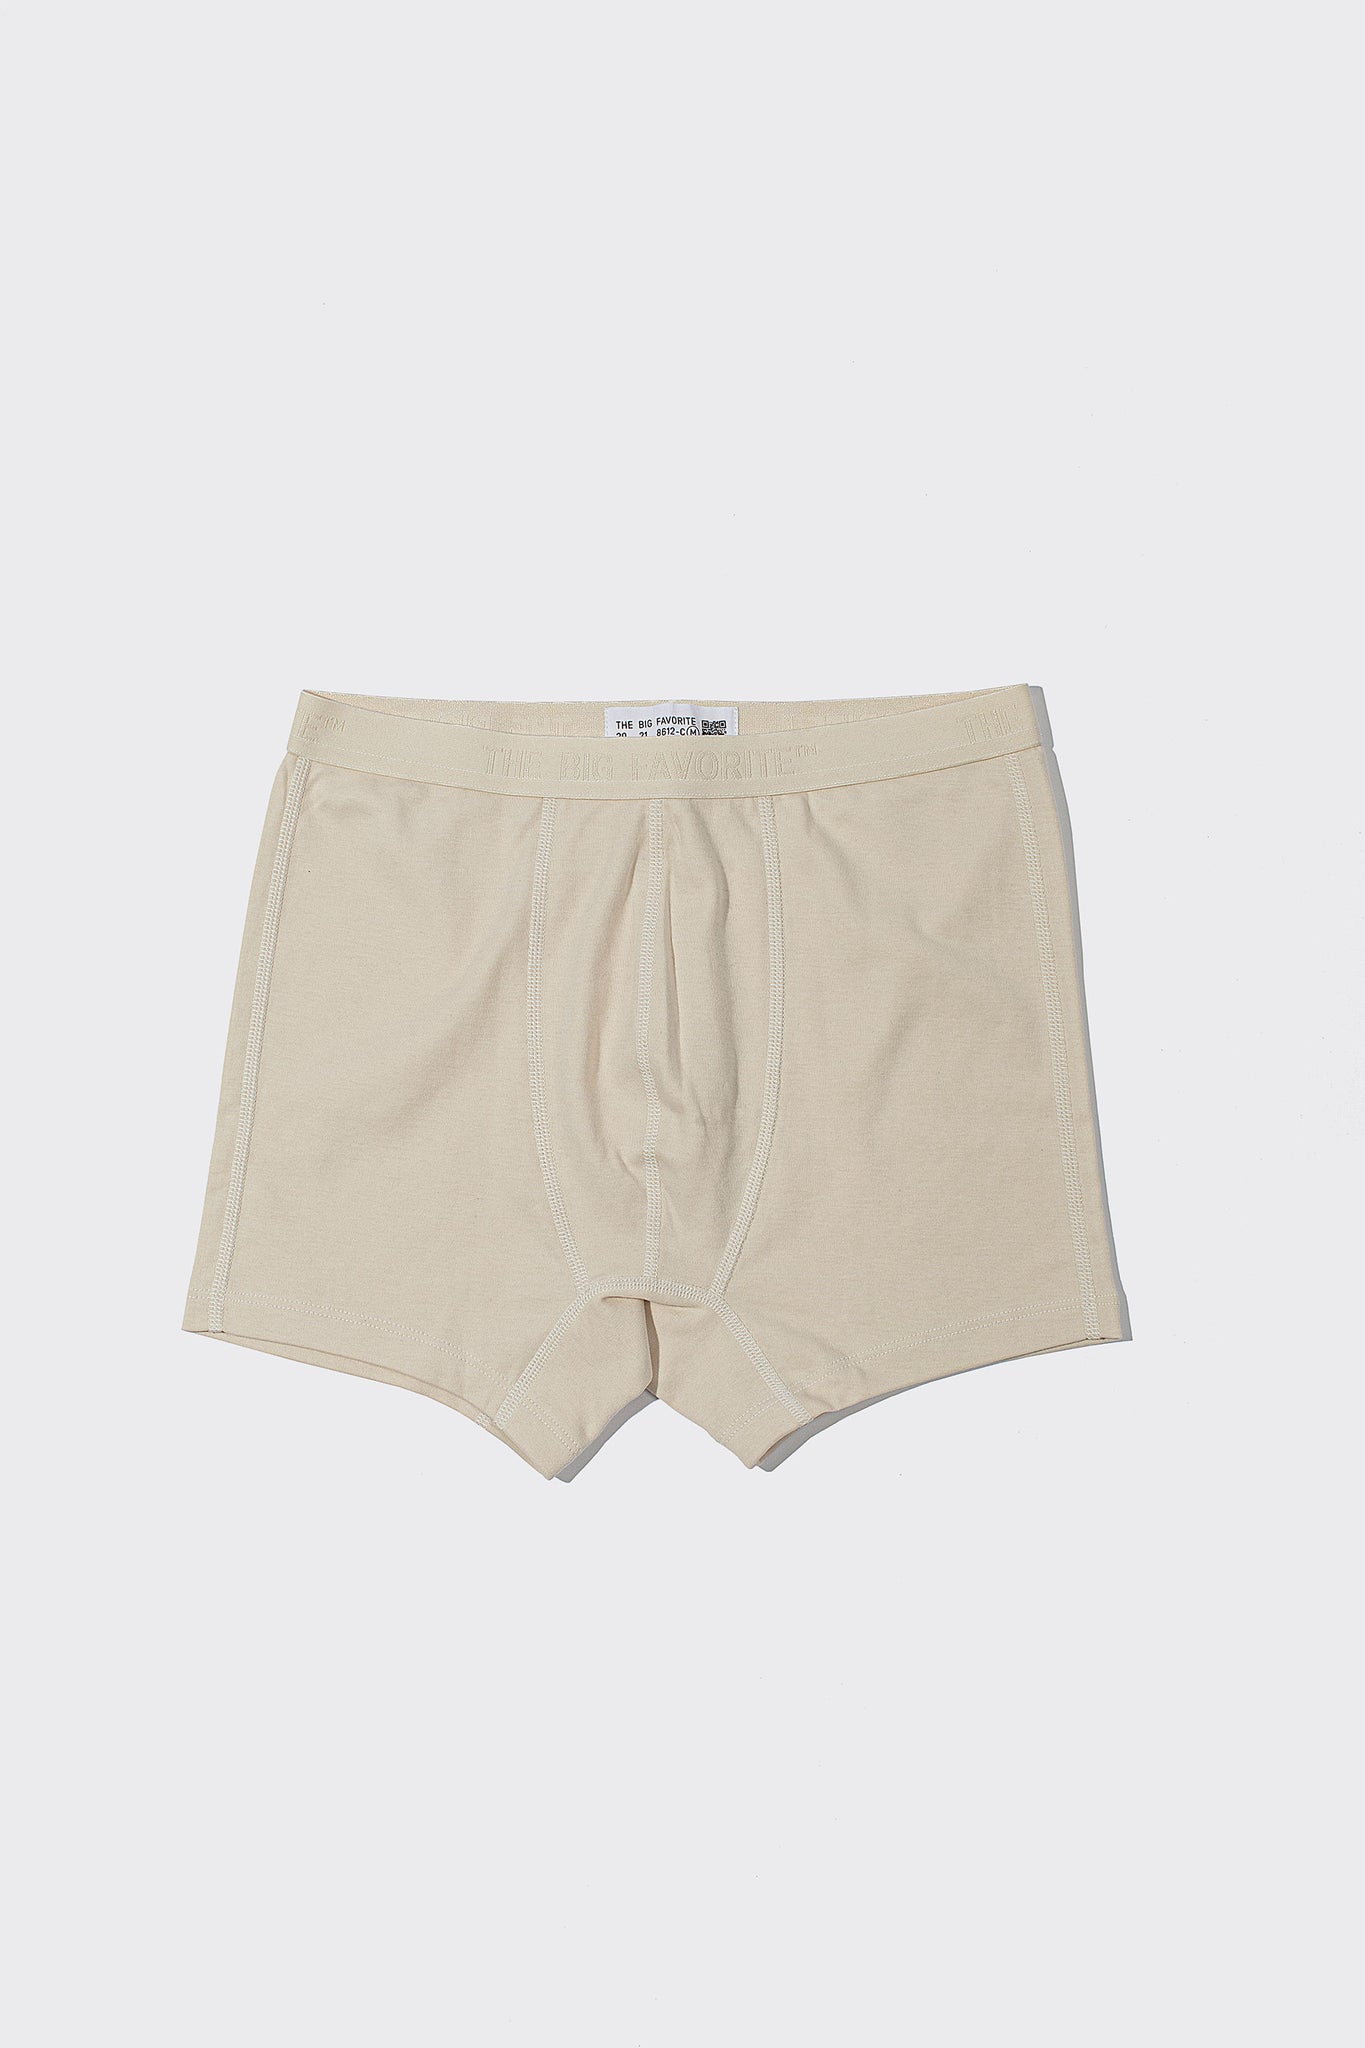 The Undyed Boxer Brief – The Big Favorite